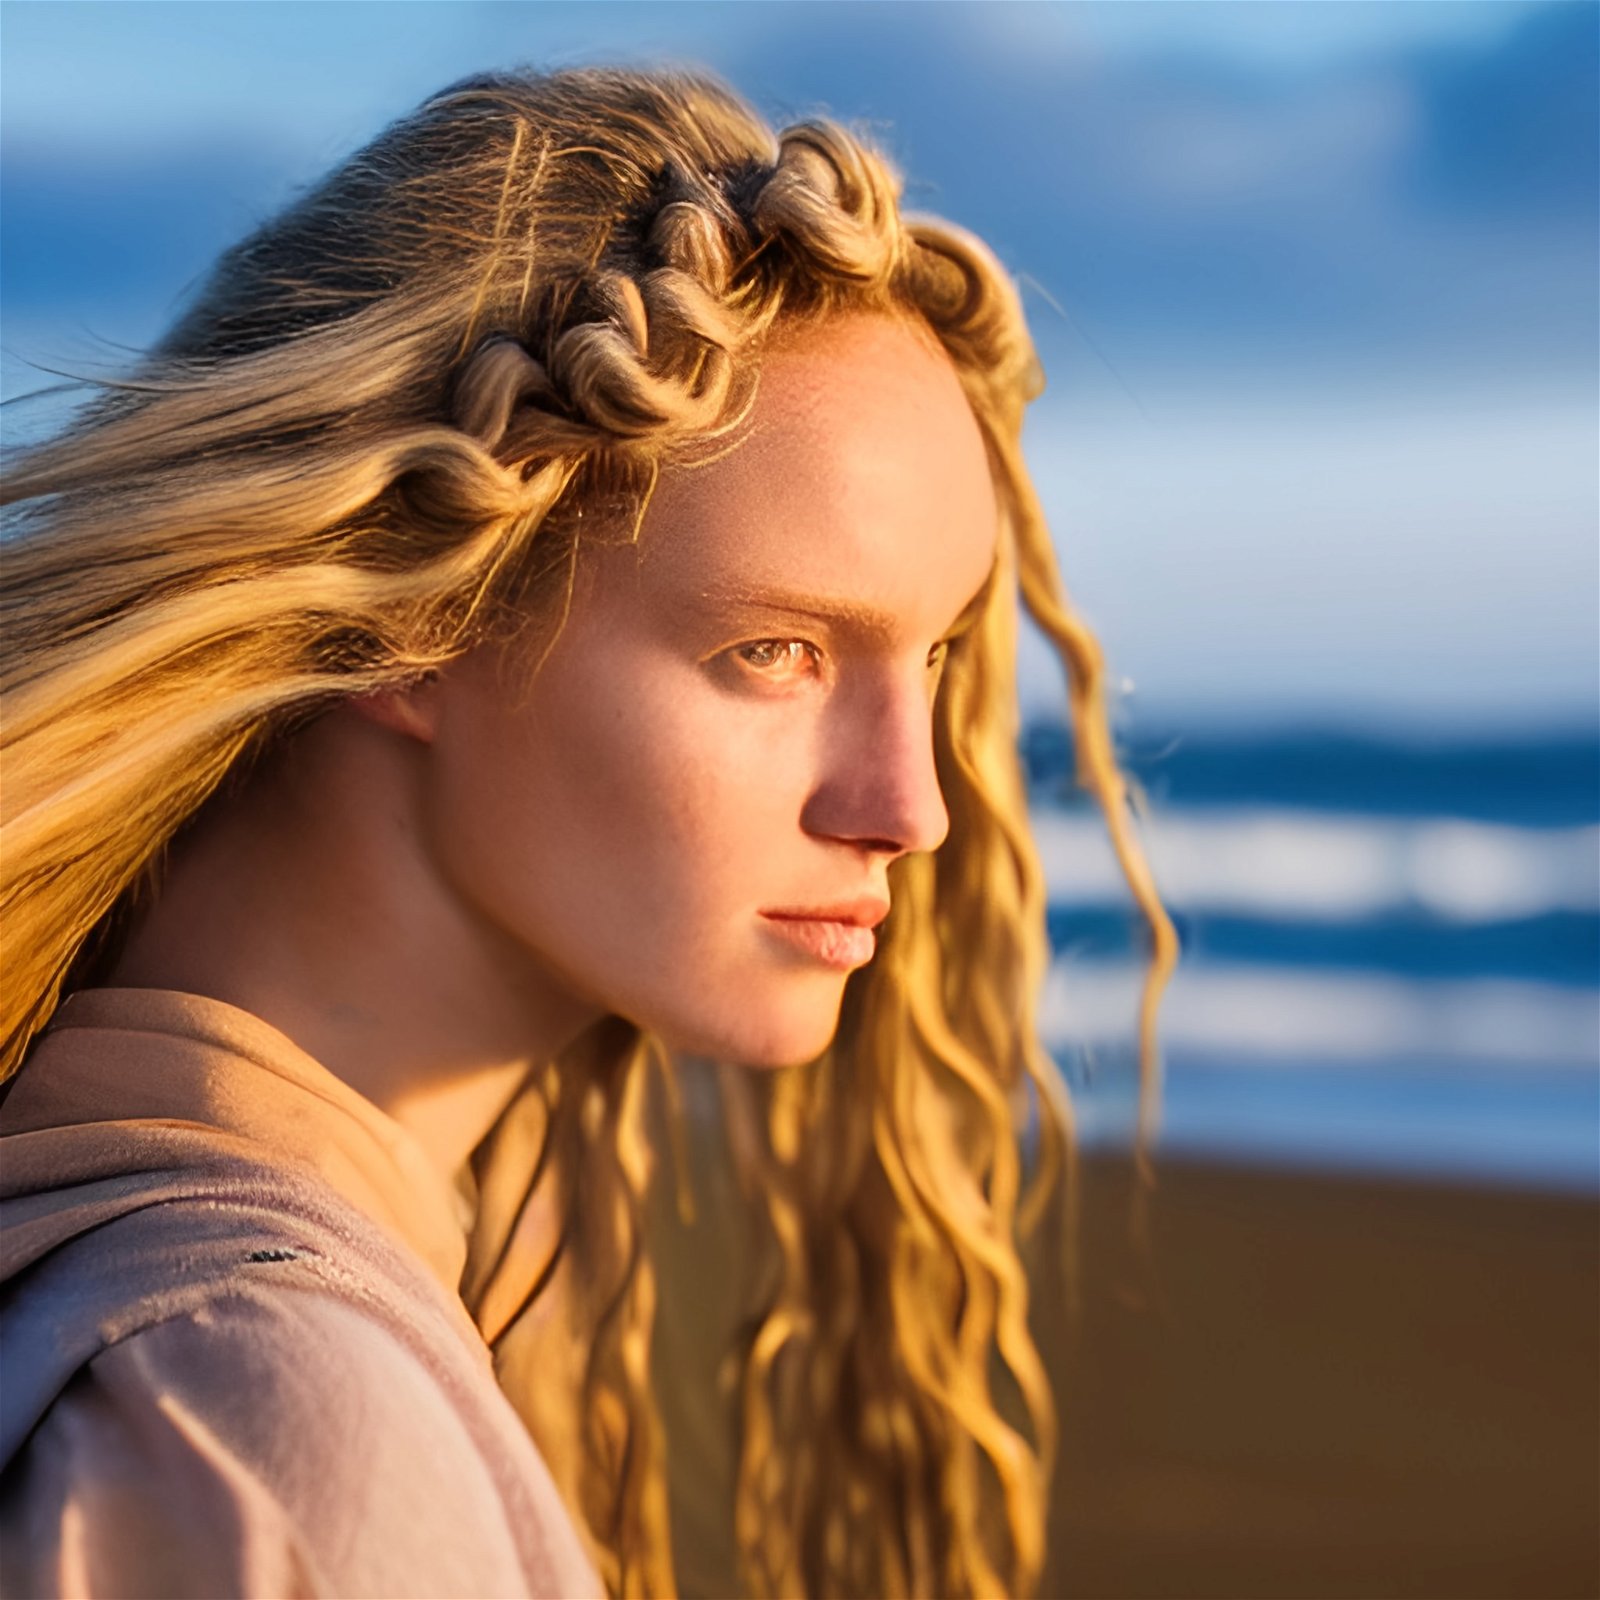 A fantasy viking woman standing at the beach, looking over the sea, in the sunset